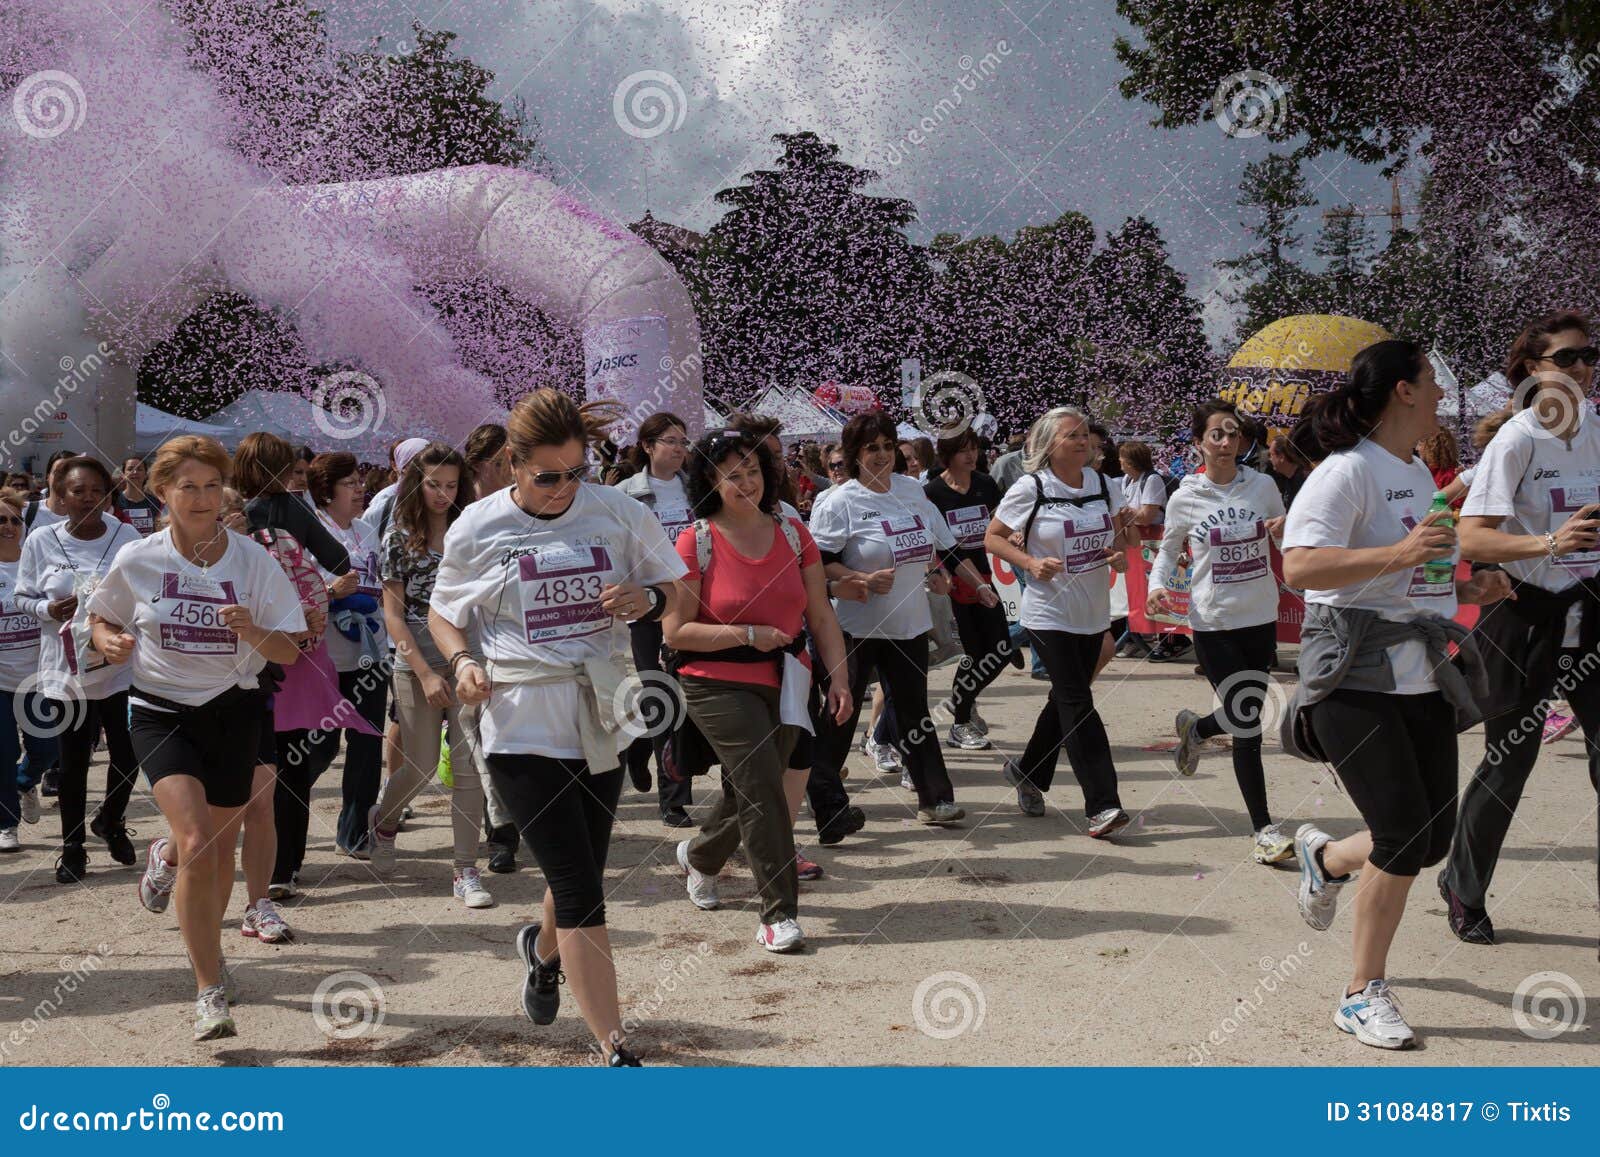 Thousands Of Women Take Part In The Avon Running 13 Editorial Photography Image Of Women Runner